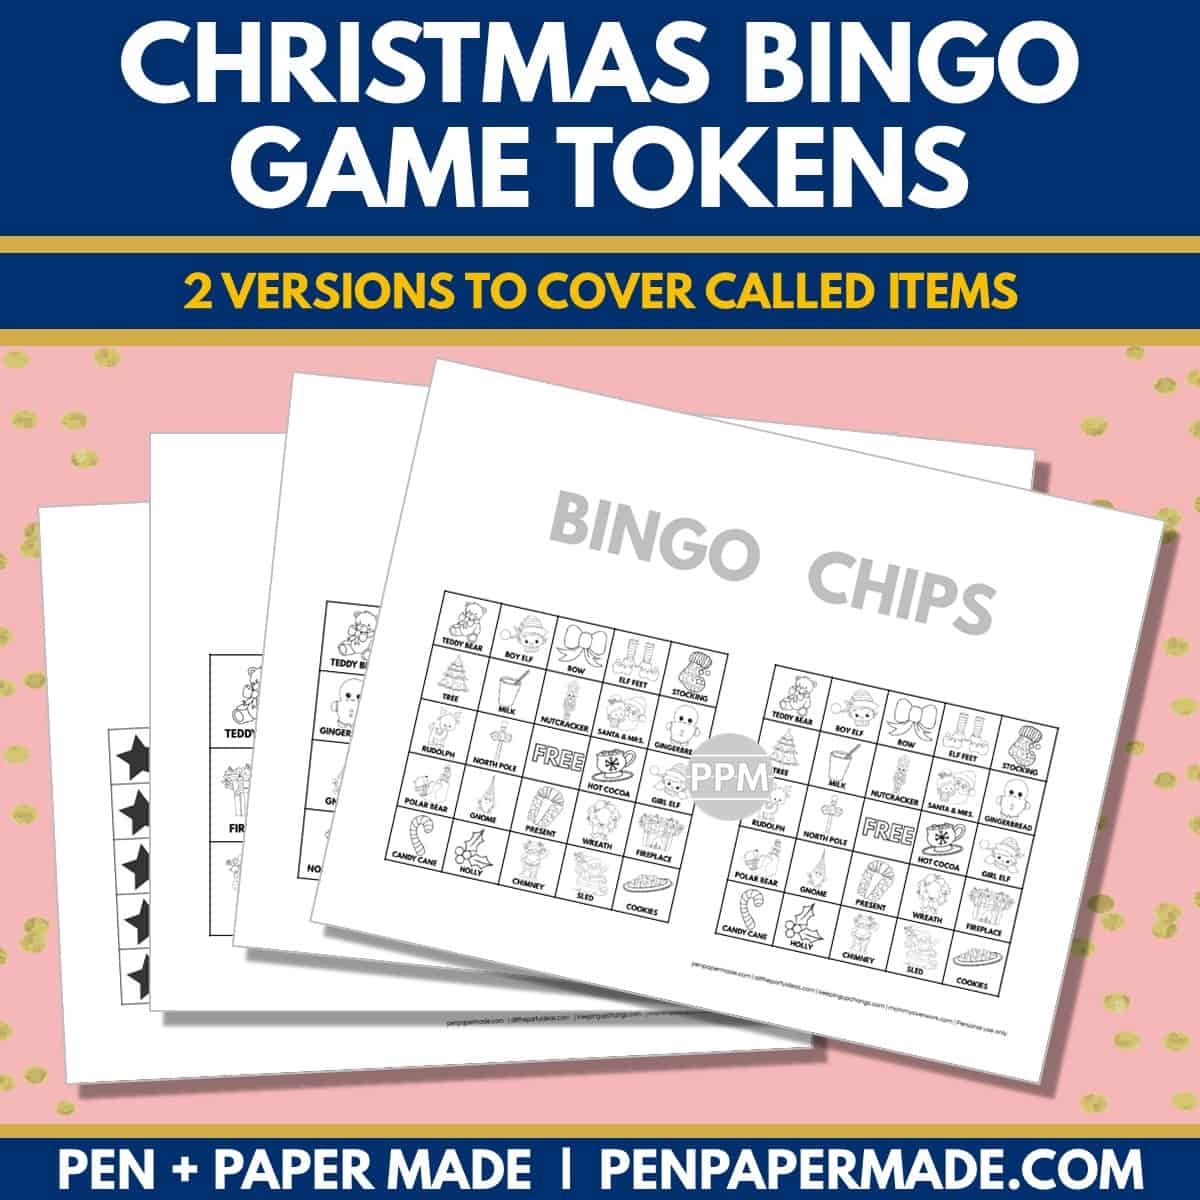 christmas bingo card 5x5, 4x4, 3x3 game chips, tokens, markers.